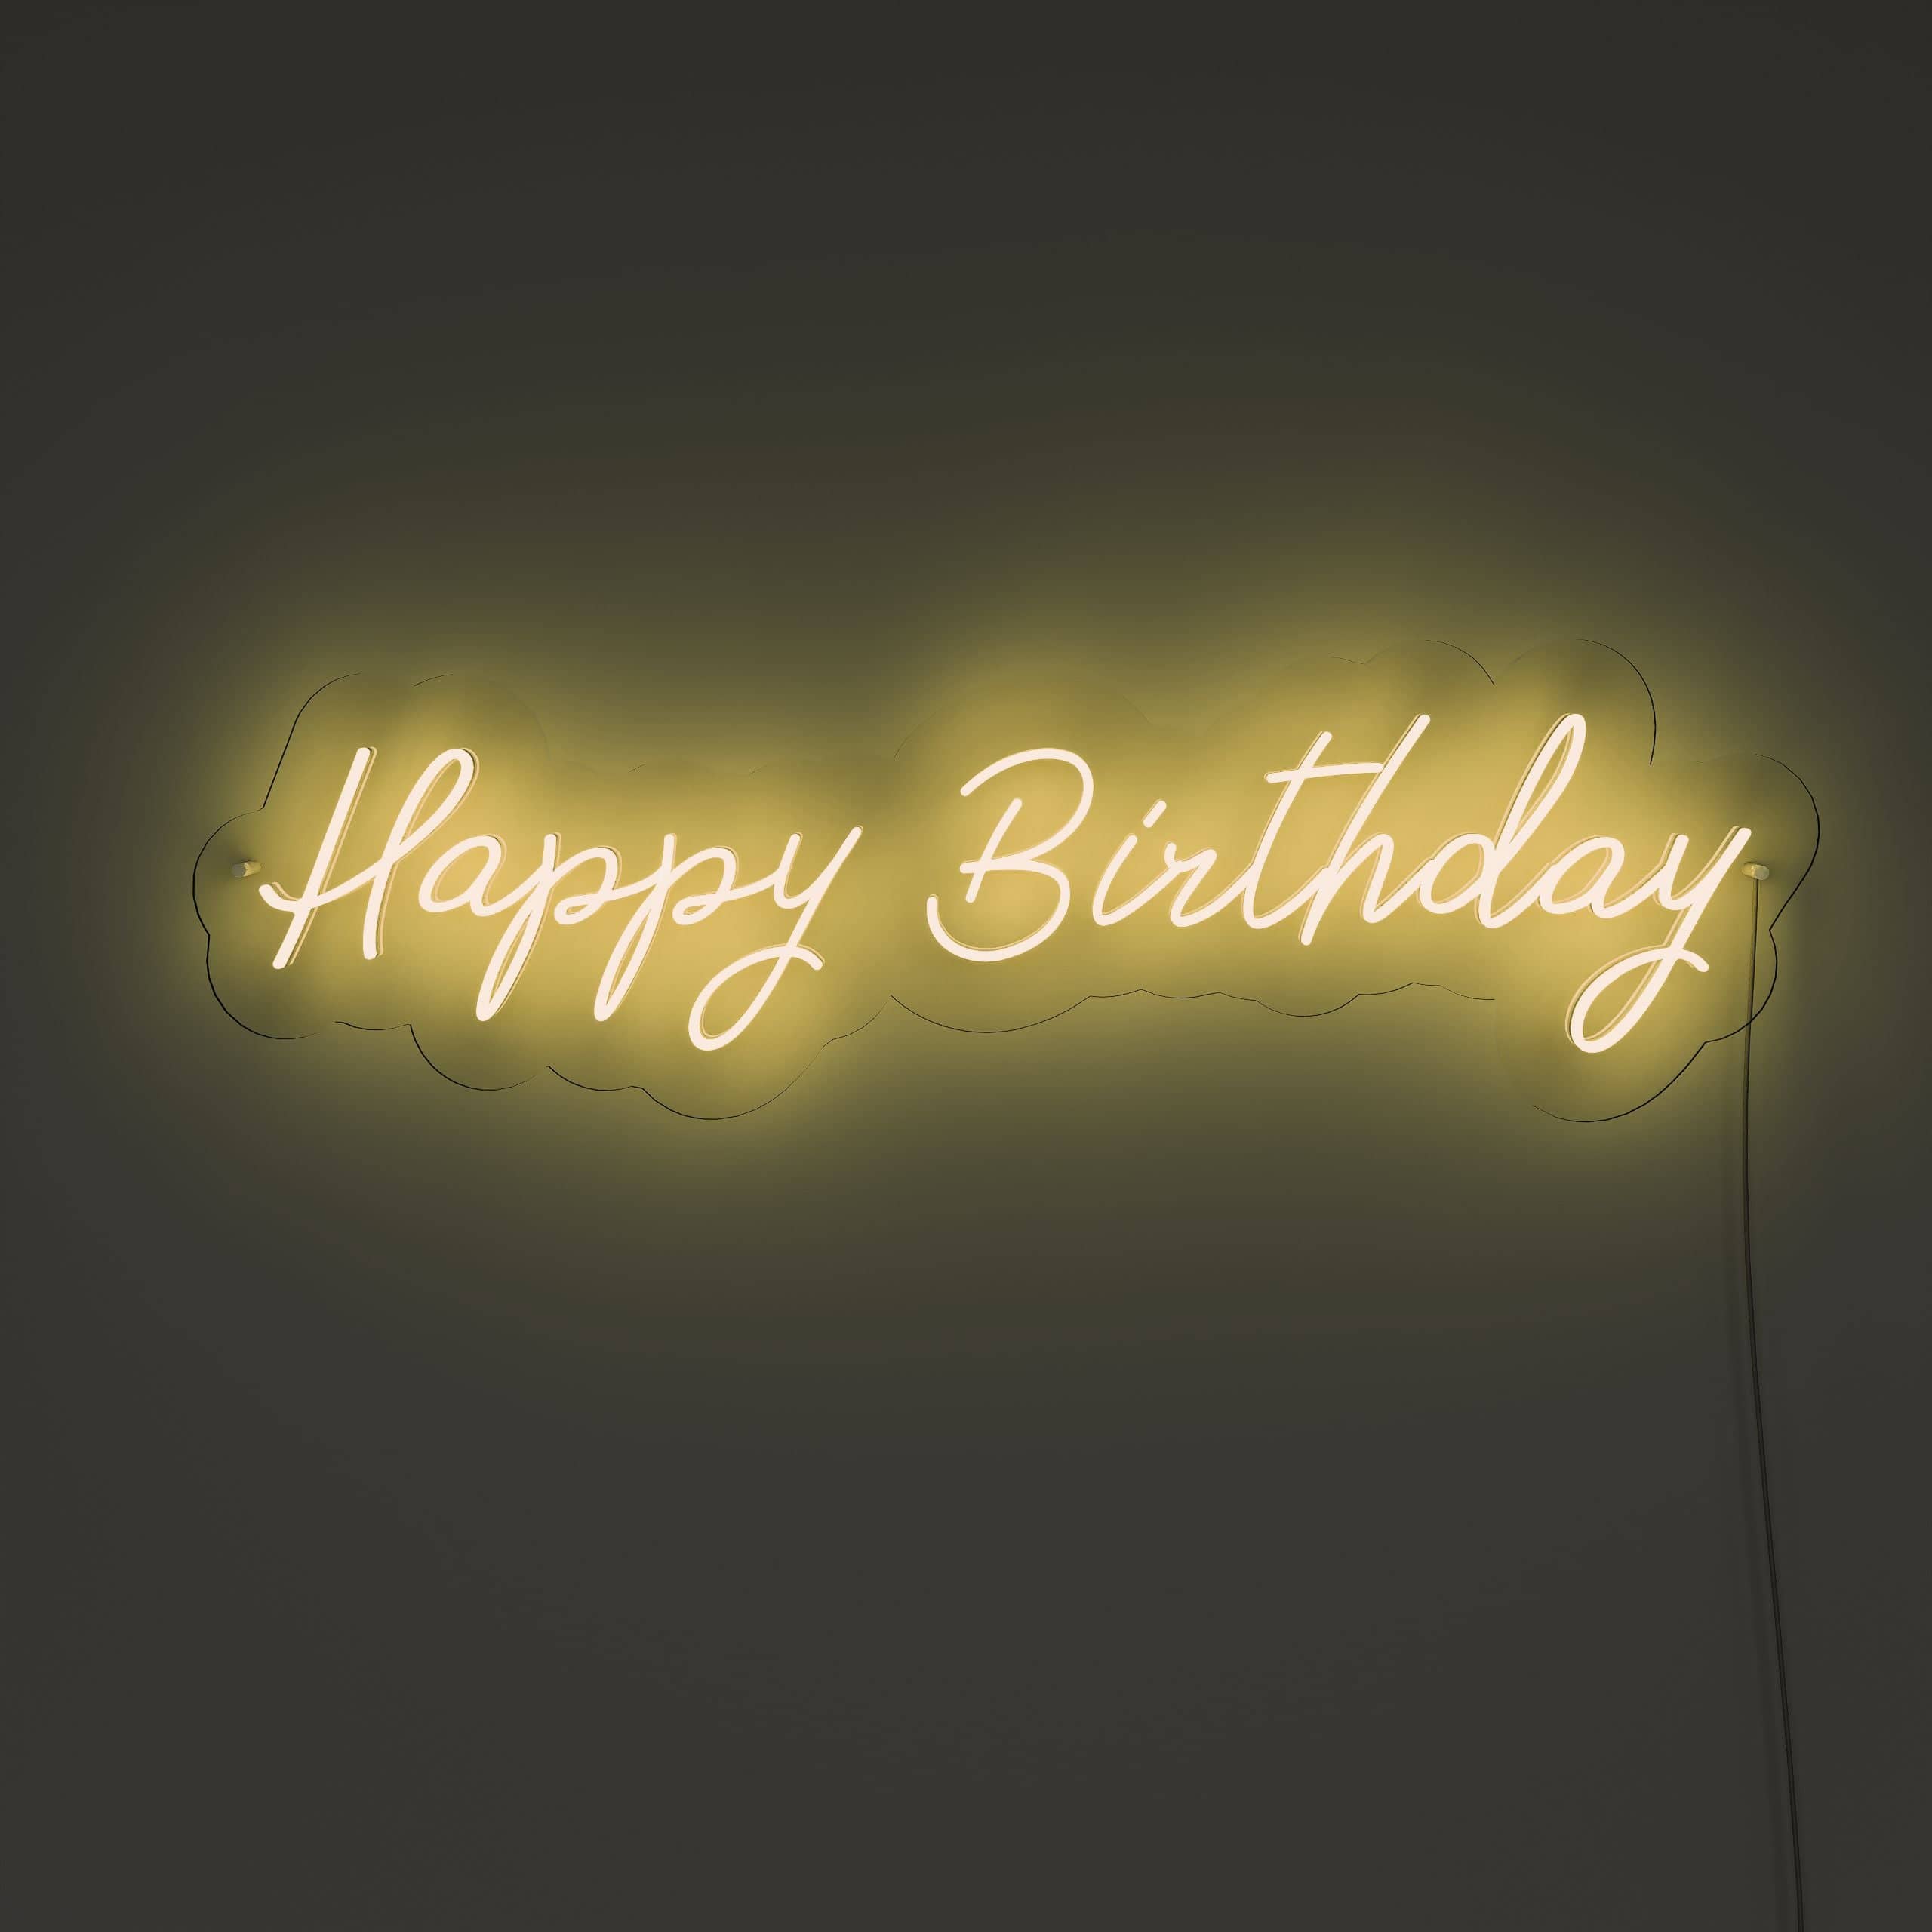 let-the-neon-colors-light-up-your-birthday!-neon-sign-lite